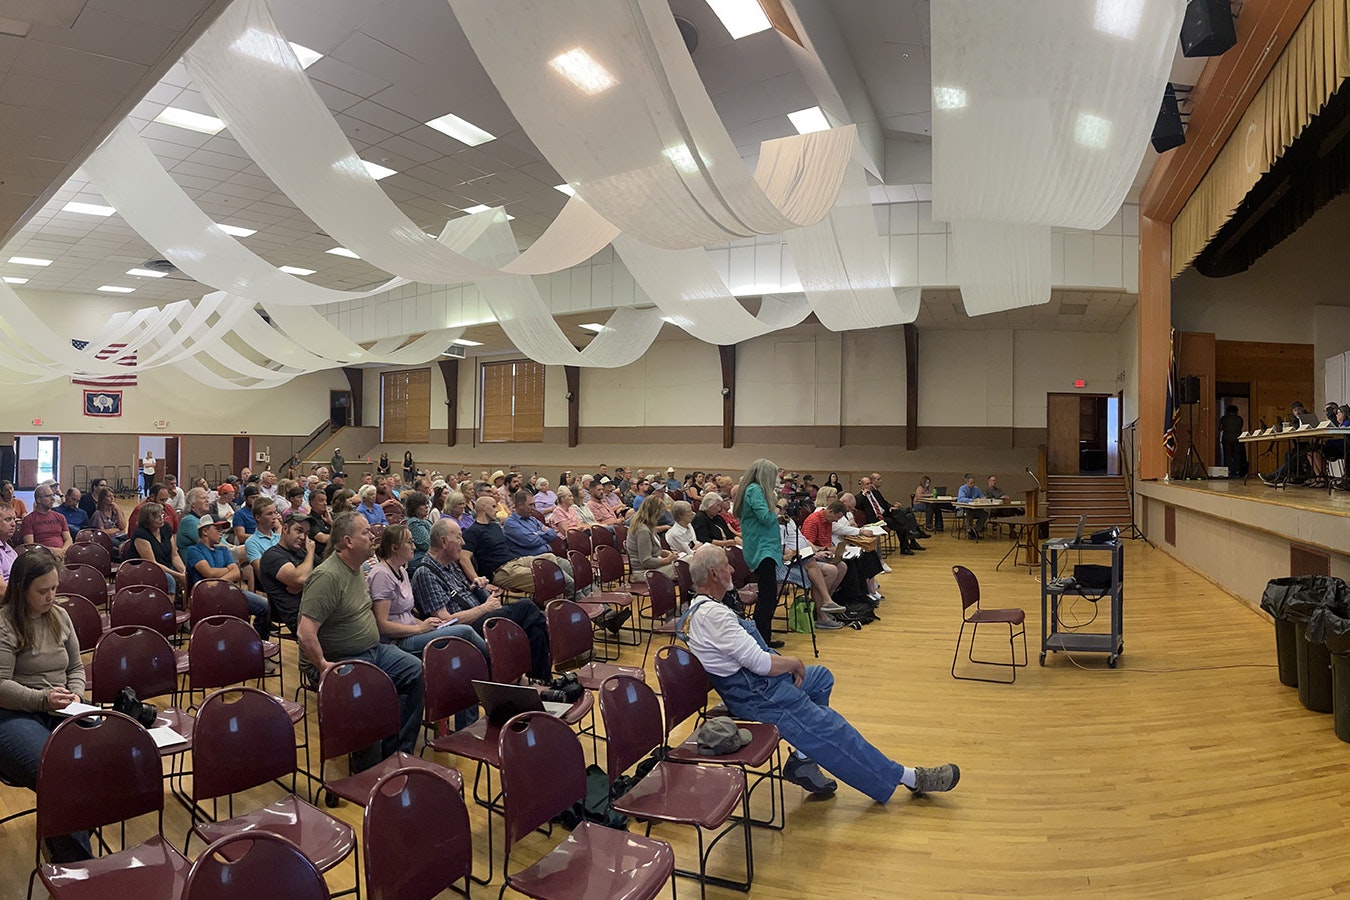 About 100 people filed into the Cody Auditorium on Tuesday evening for a Planning and Zoning Board meeting to vote on an application to build an LDS temple.